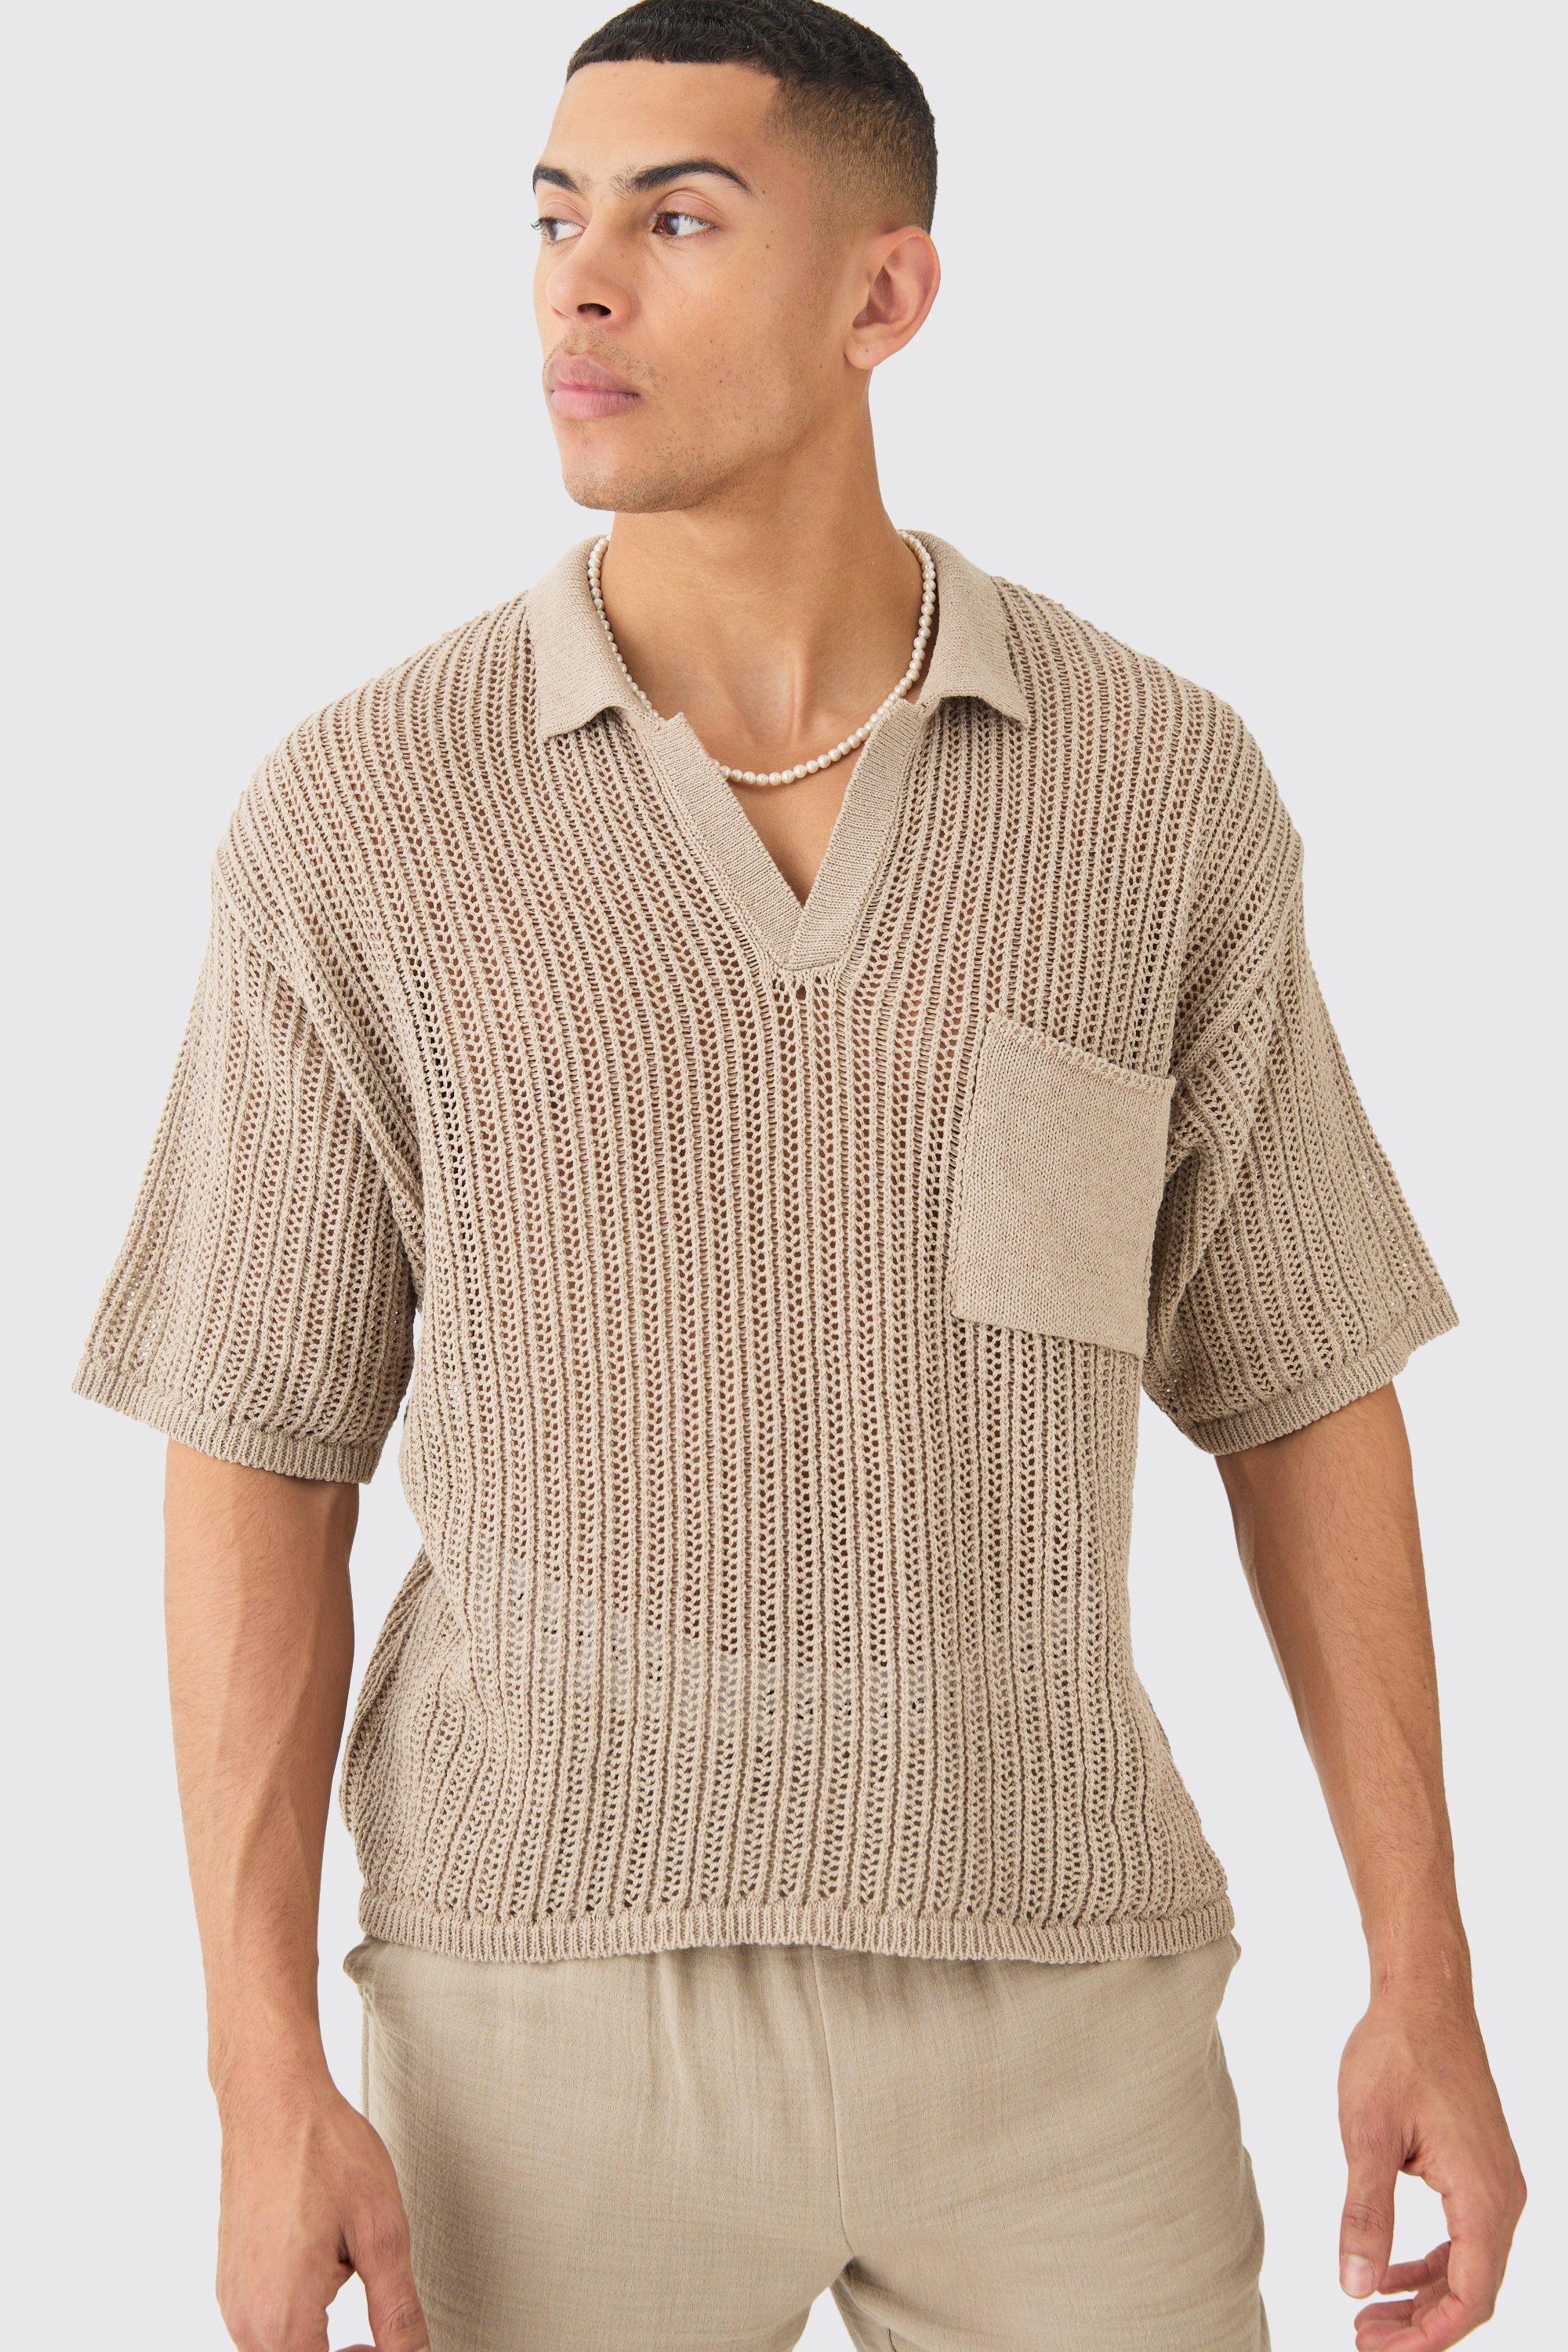 Image of Oversized Boxy Open Stitch Polo With Pocket In Taupe, Beige